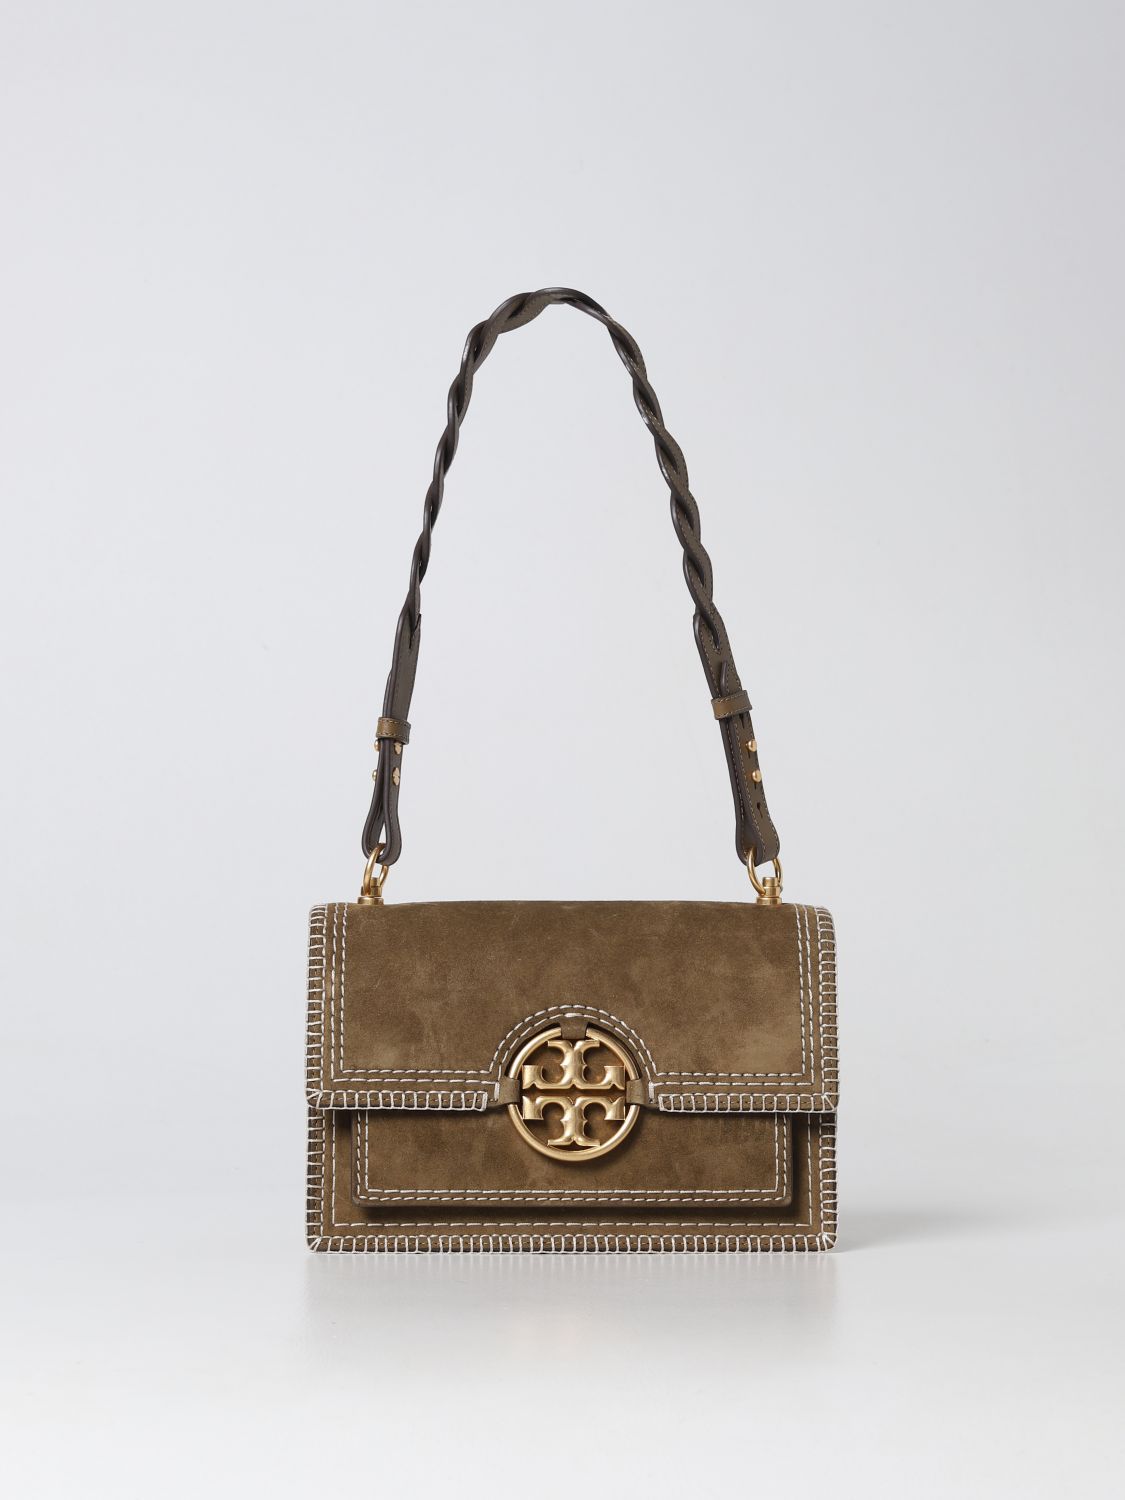 Tory Burch Brown Tote/Shoulder Bag – Changes Luxury Consignment